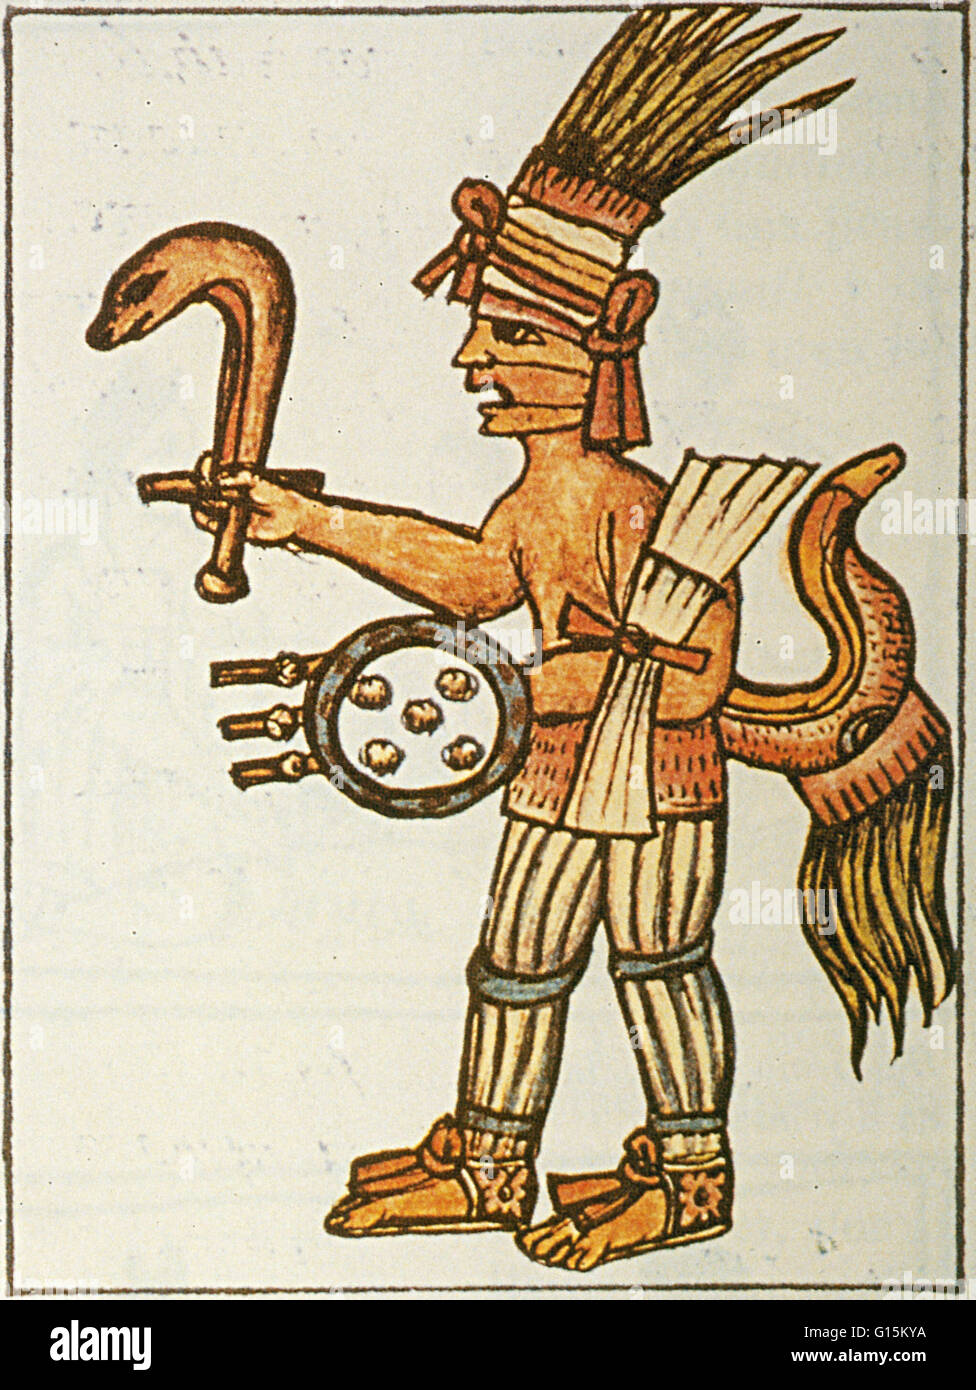 Huitzilopochtli with fire serpent, from the Florentine Codex. In Aztec religion, Huitzilopochtli was a god of war, sun, human sacrifice and the patron of the city of Tenochtitlan. He was also the national god of the Mexicas of Tenochtitlan. Huitzilopochtl Stock Photo